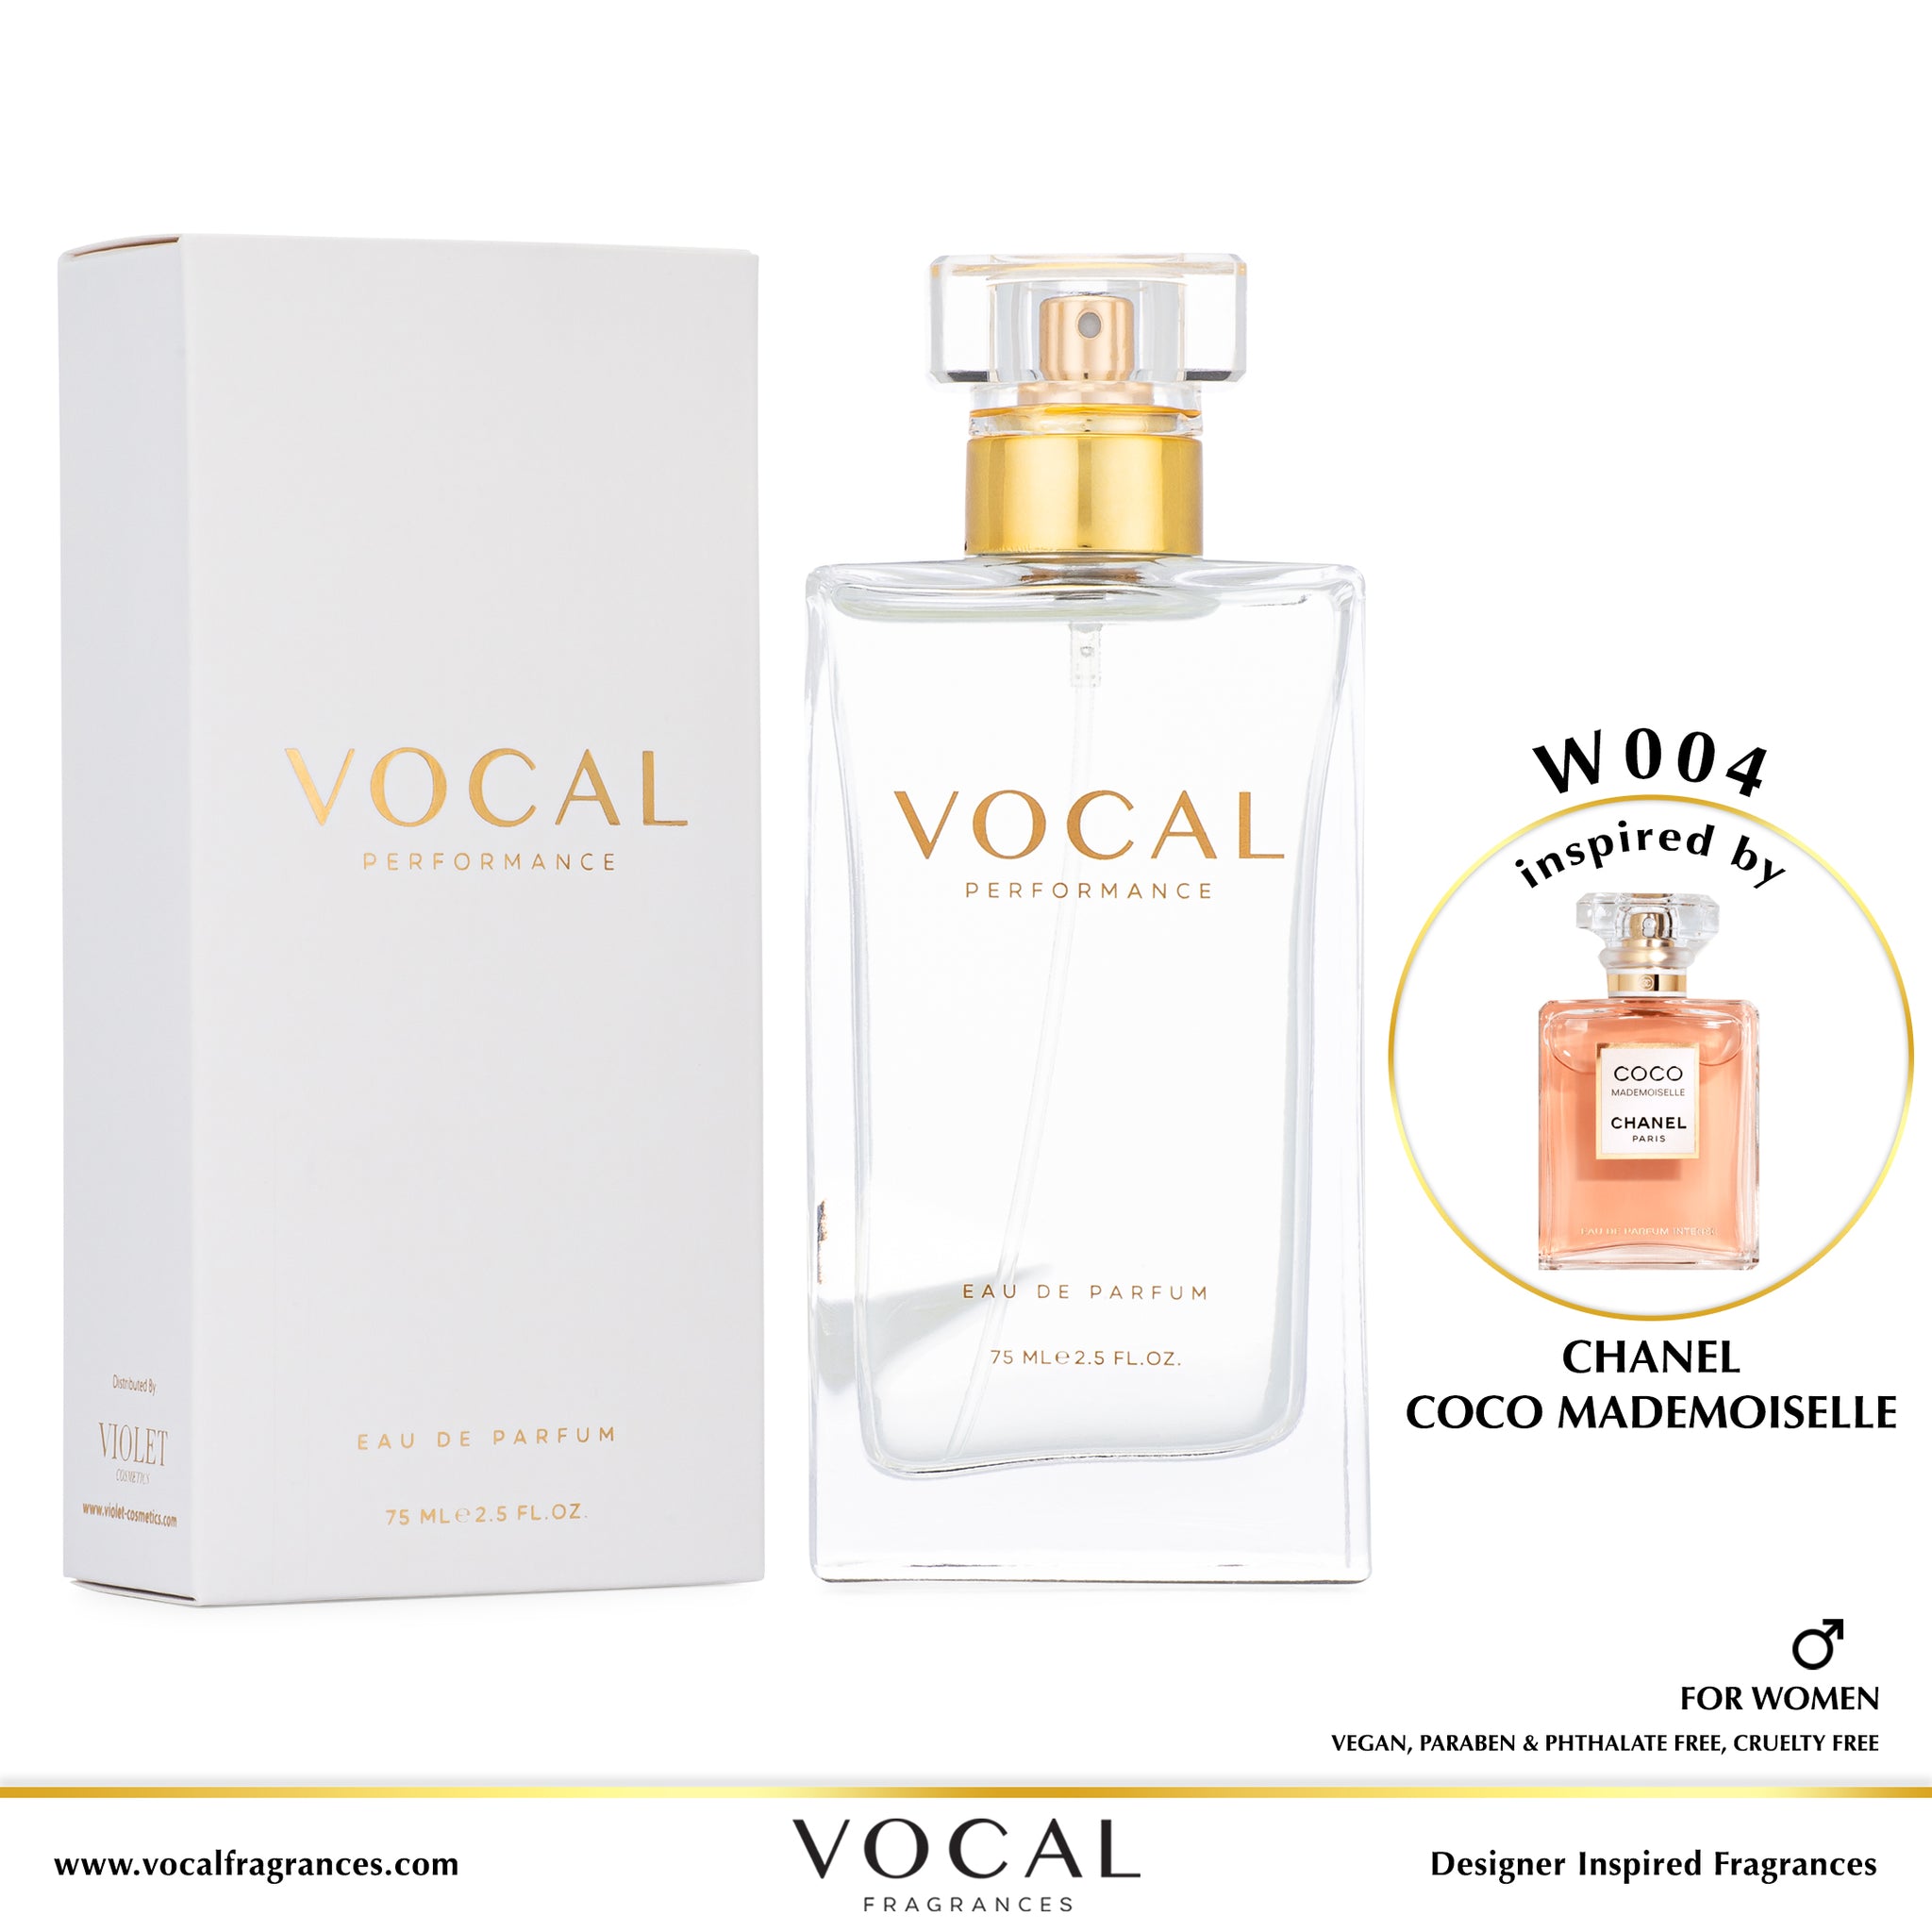 W004 Vocal Performance Eau De Parfum For Women Inspired by Chanel